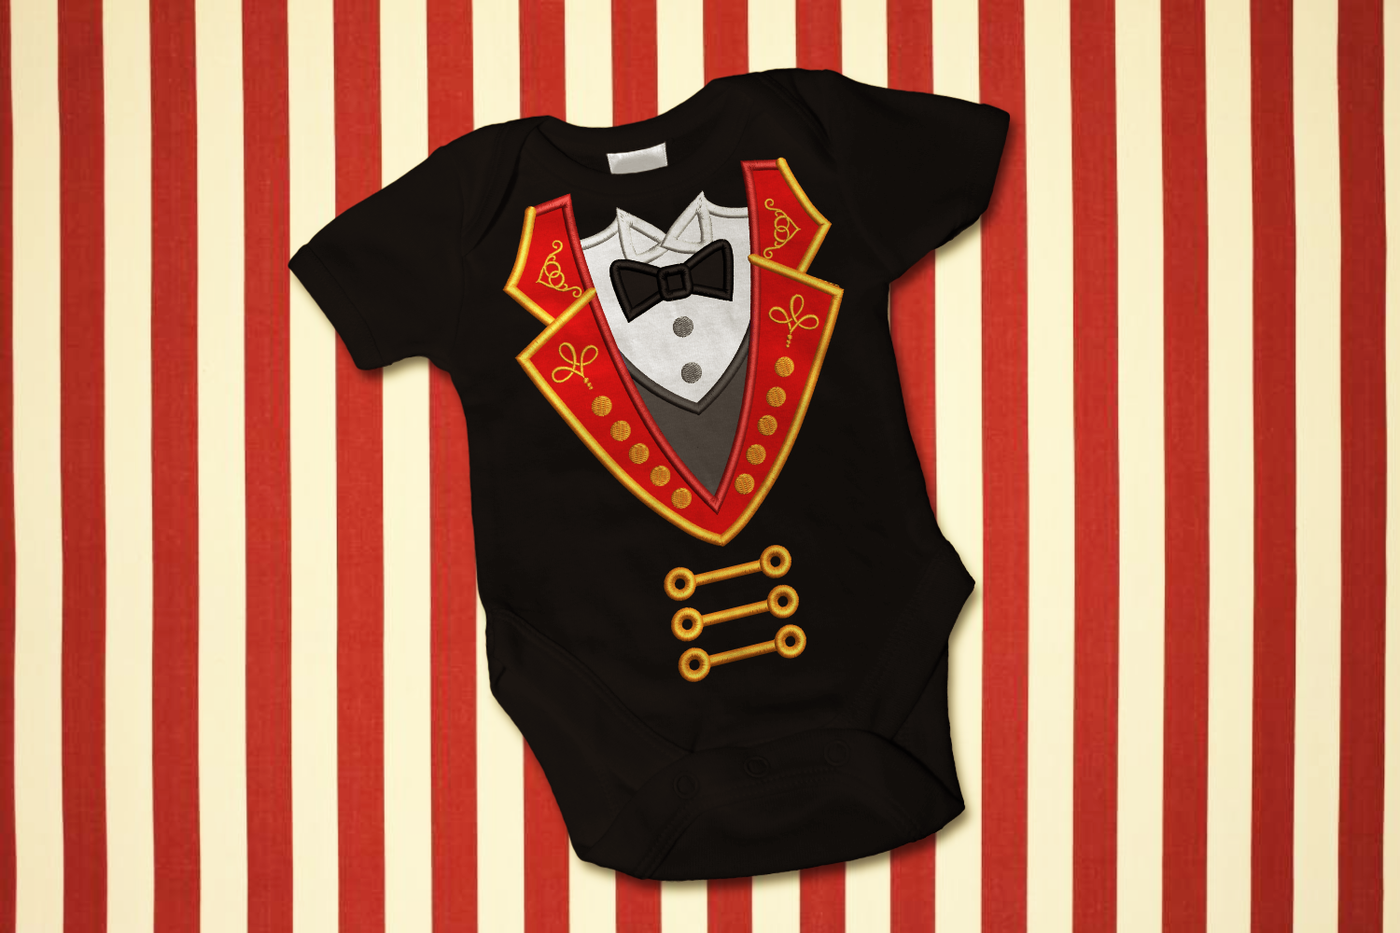 A black onesie on a red and ivory striped background. Appliqued onto the onesie is a design to make it look like a ringmaster's coat.